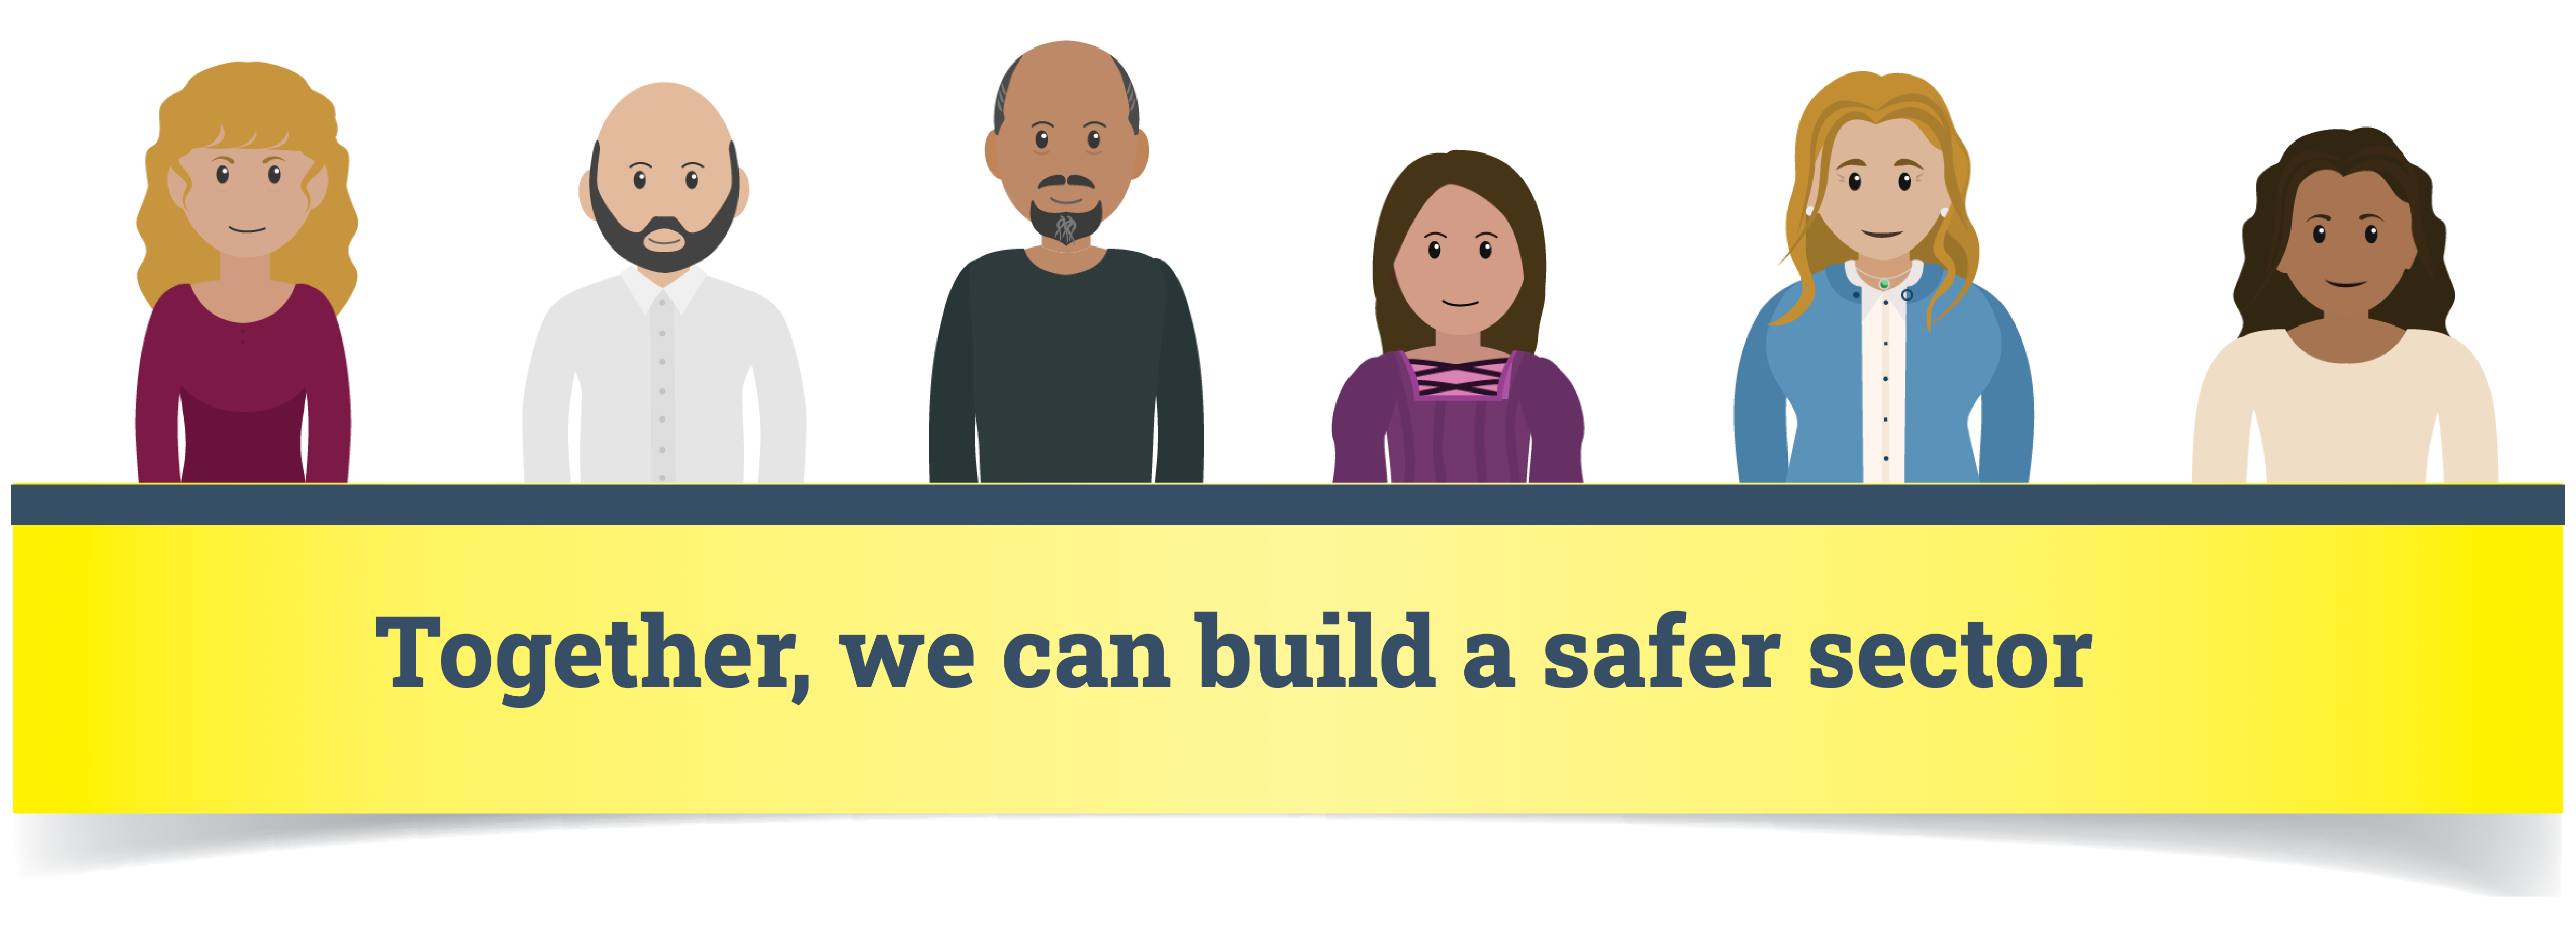 Together, we can build a safer sector  